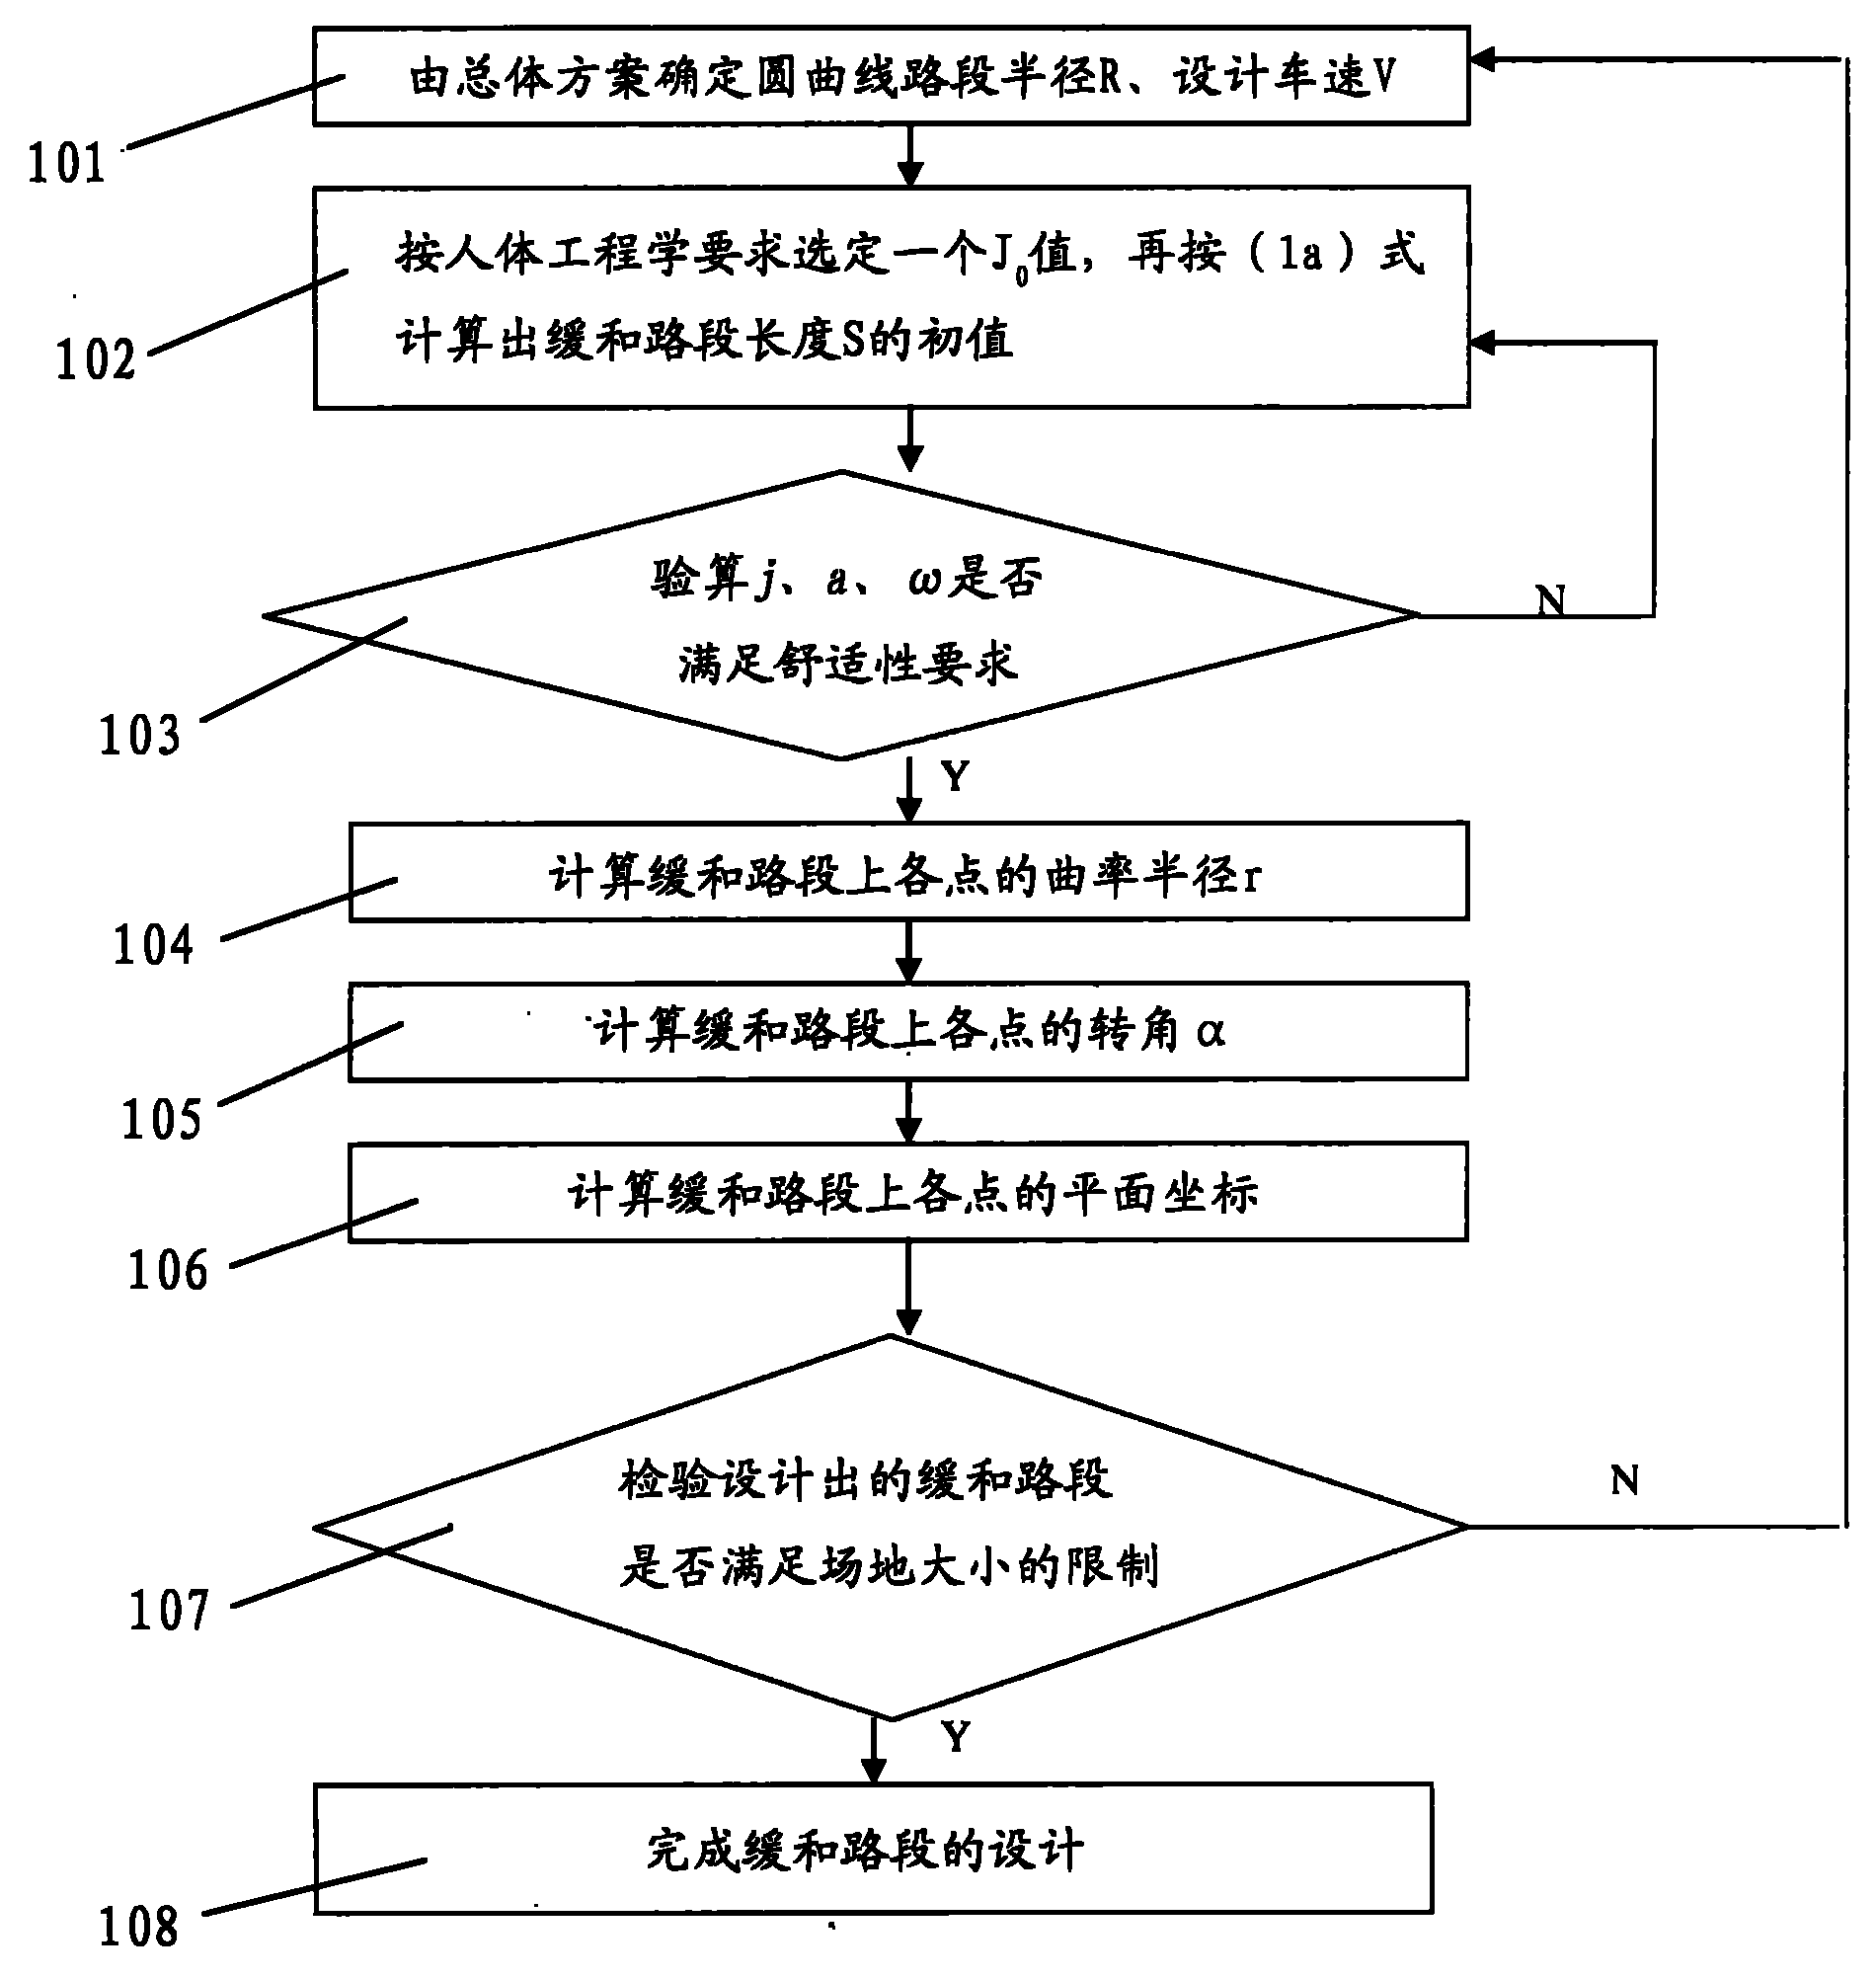 Design method for transition curve path section